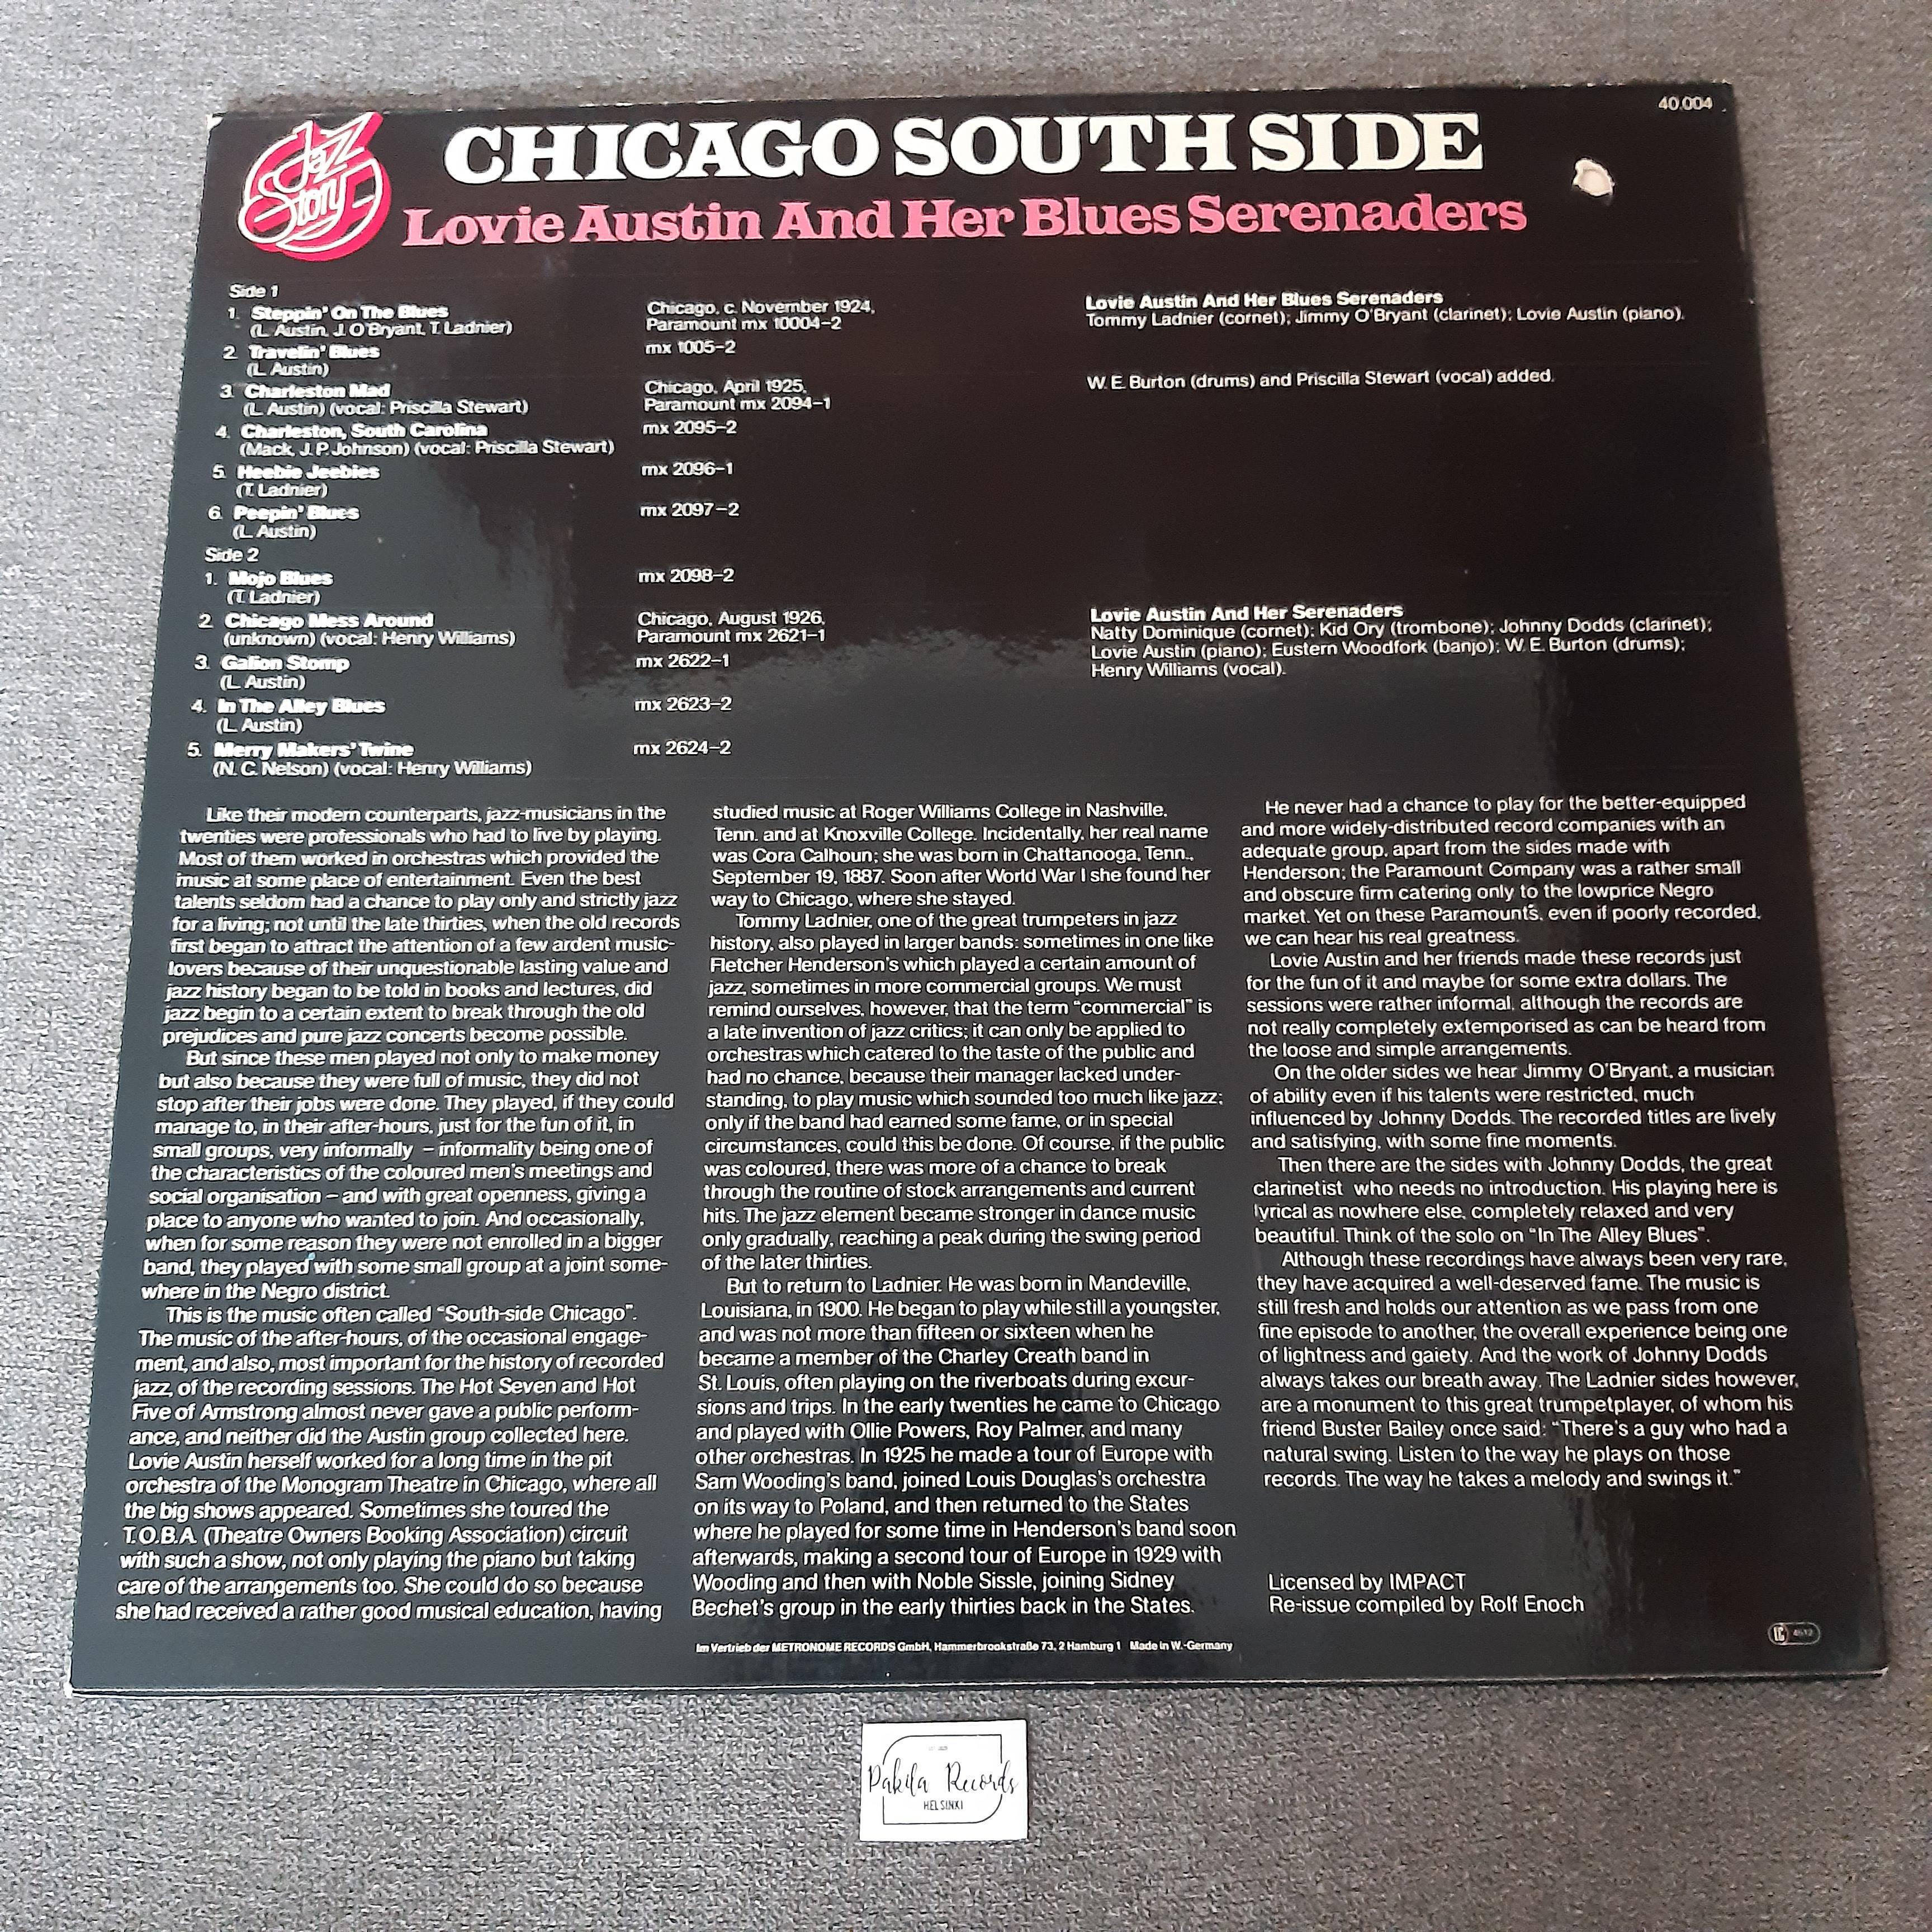 Lovie Austin And Her Blues Serenaders - Chicago South Side - LP (käytetty)